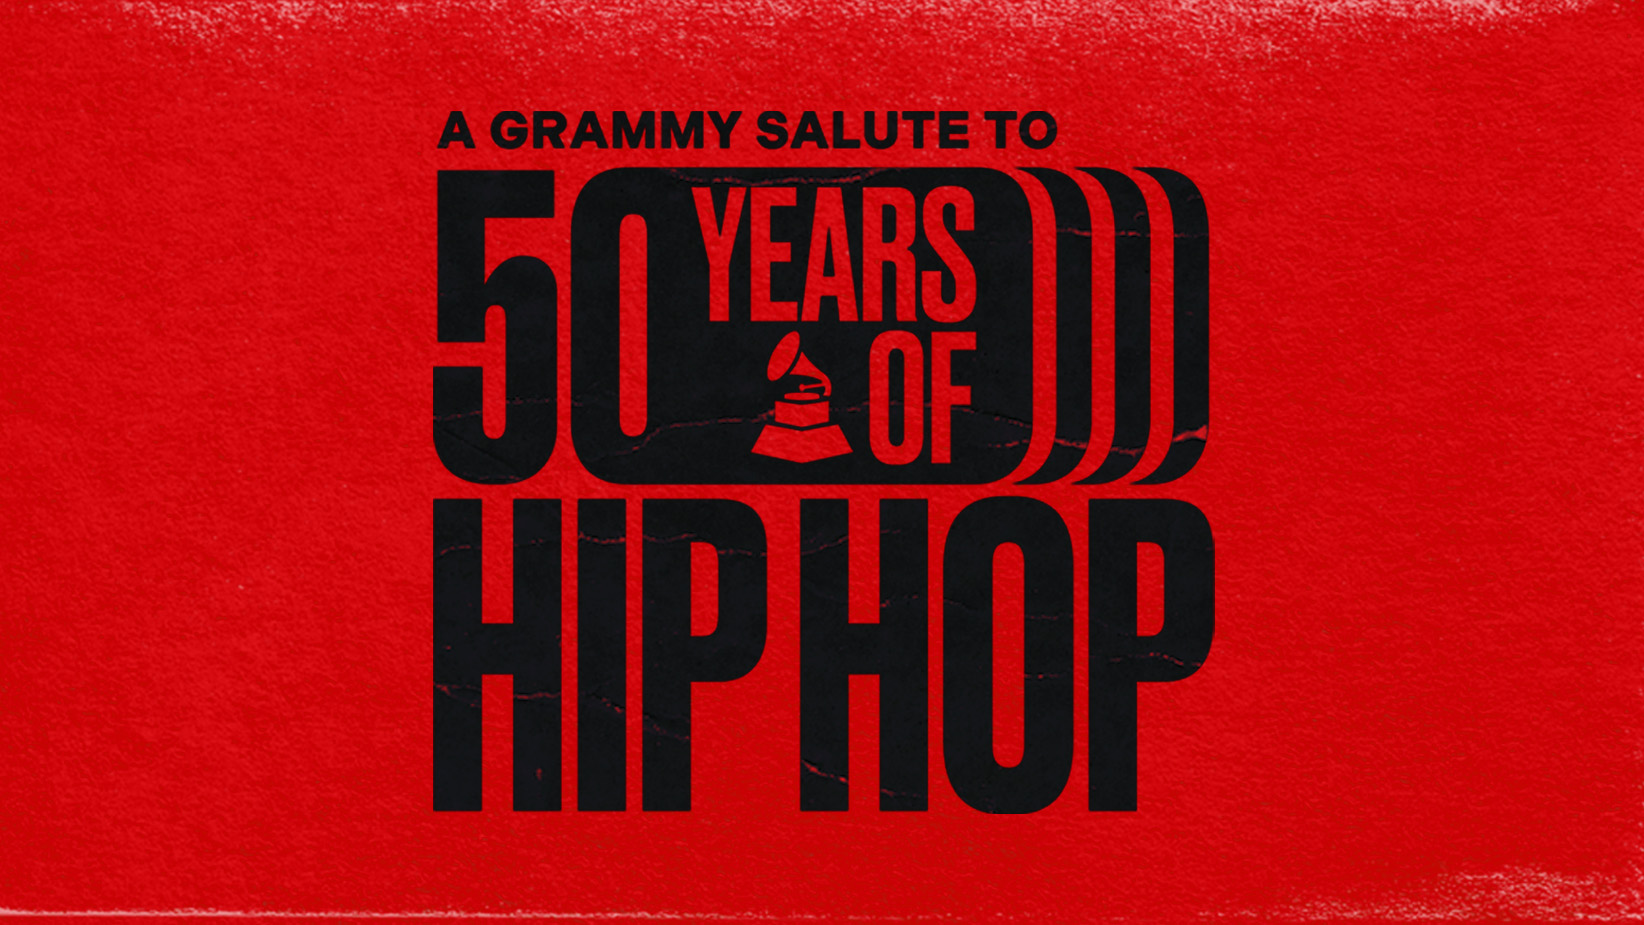 Questlove Describes The Rap Song That Began His Journey | "A GRAMMY Salute To 50 Years Of Hip-Hop"